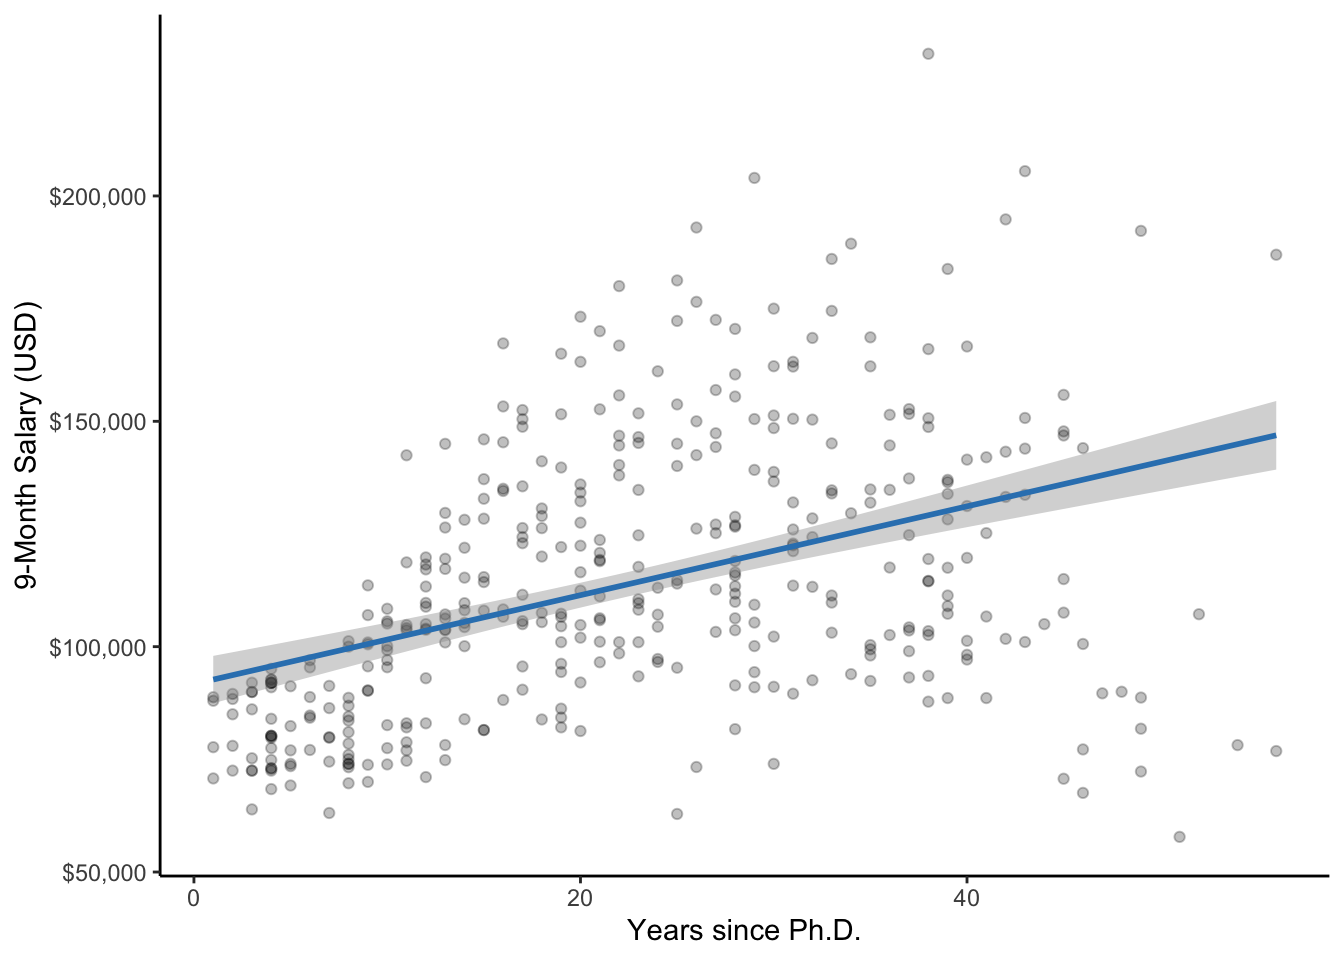 A scatterplot of years since Ph.D. and salary along with the line of best fit. The gray band represents the 95% confidence interval (CI).